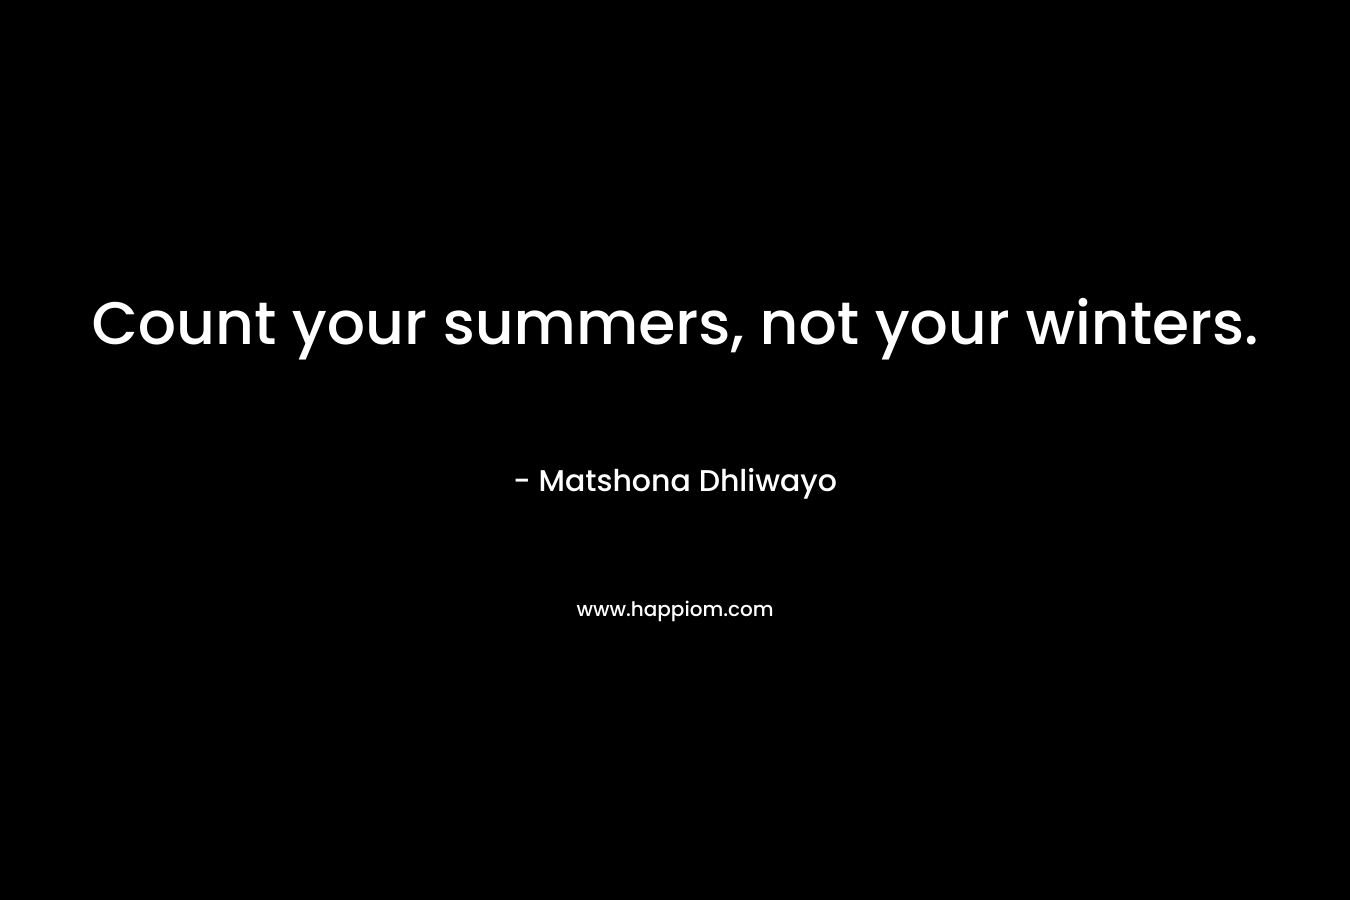 Count your summers, not your winters. – Matshona Dhliwayo